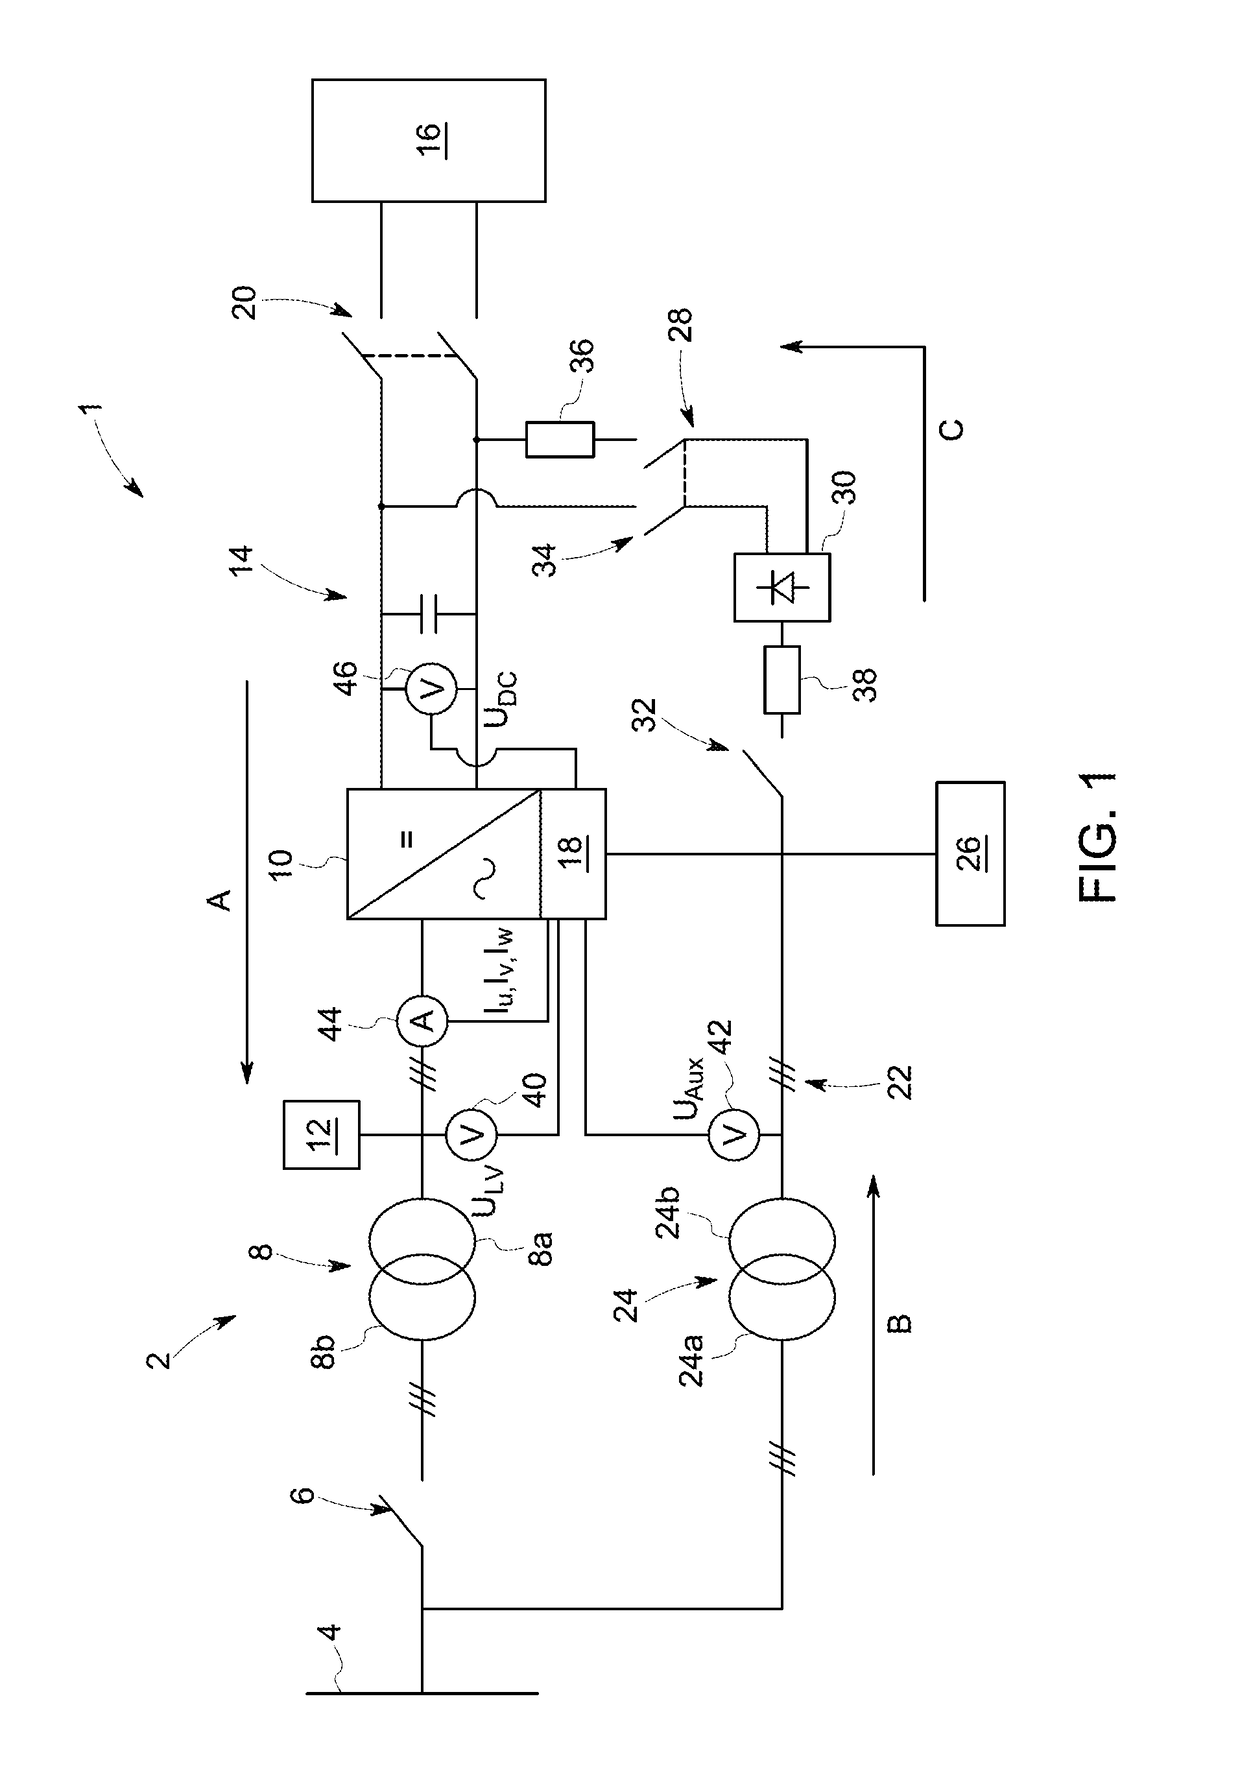 Electric circuits and power systems incorporating the same